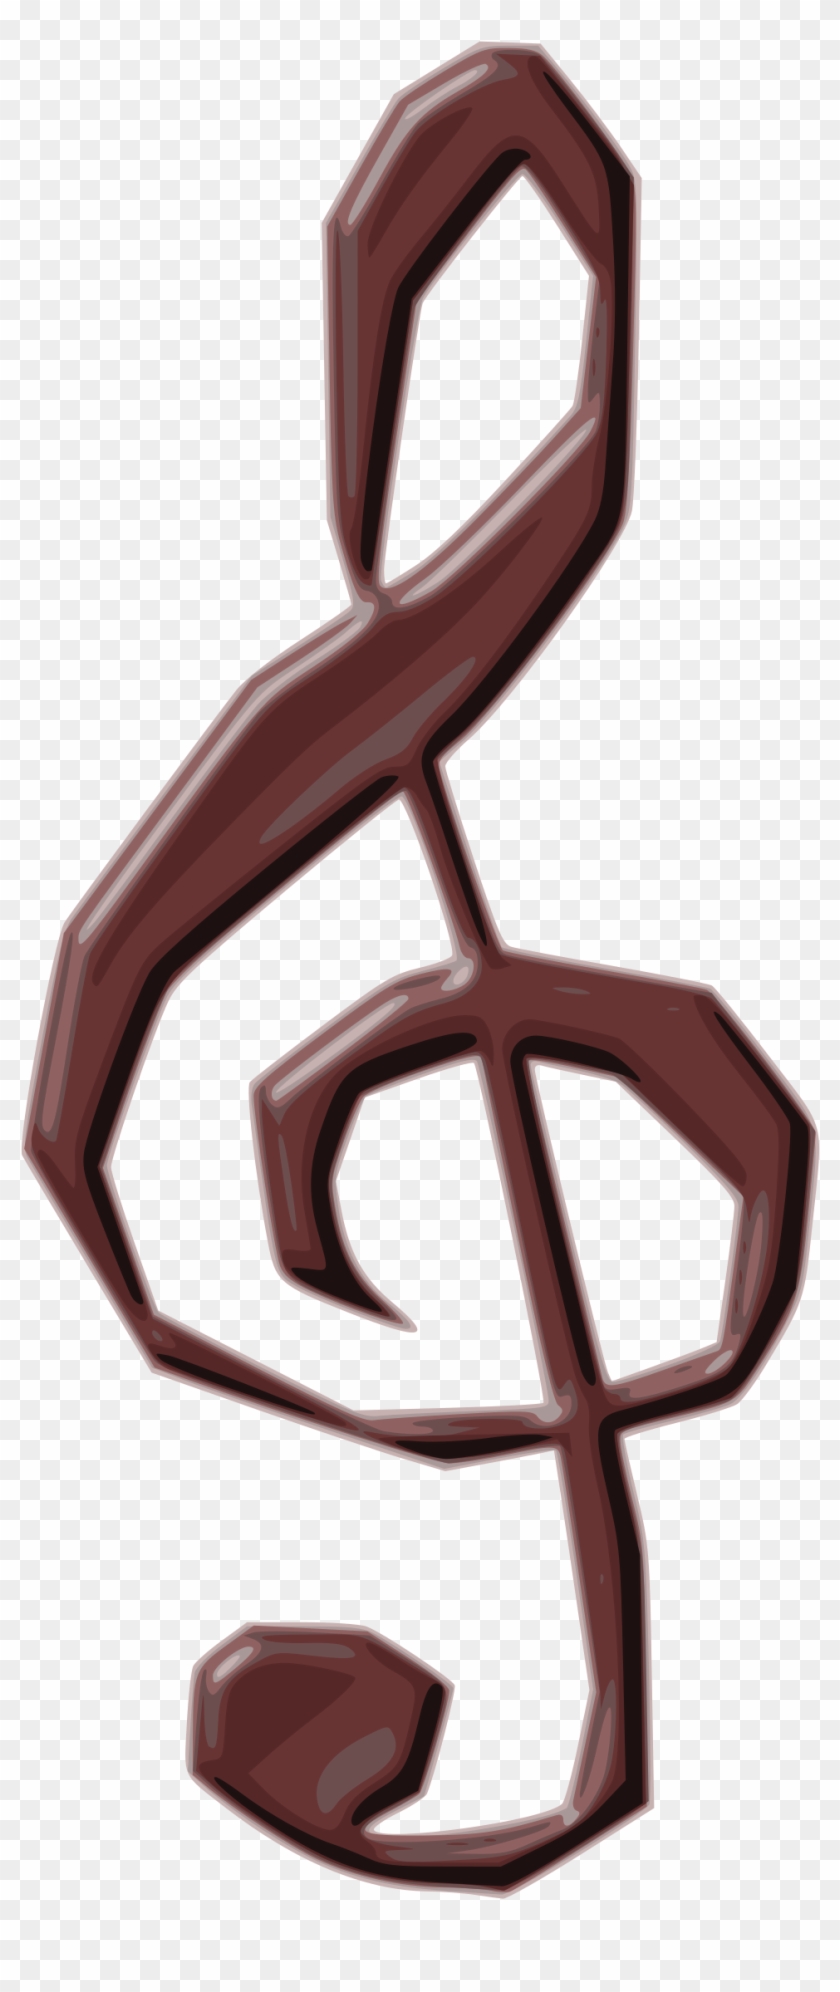 This Free Icons Png Design Of Treble Clef -chocolate Clipart #1194857